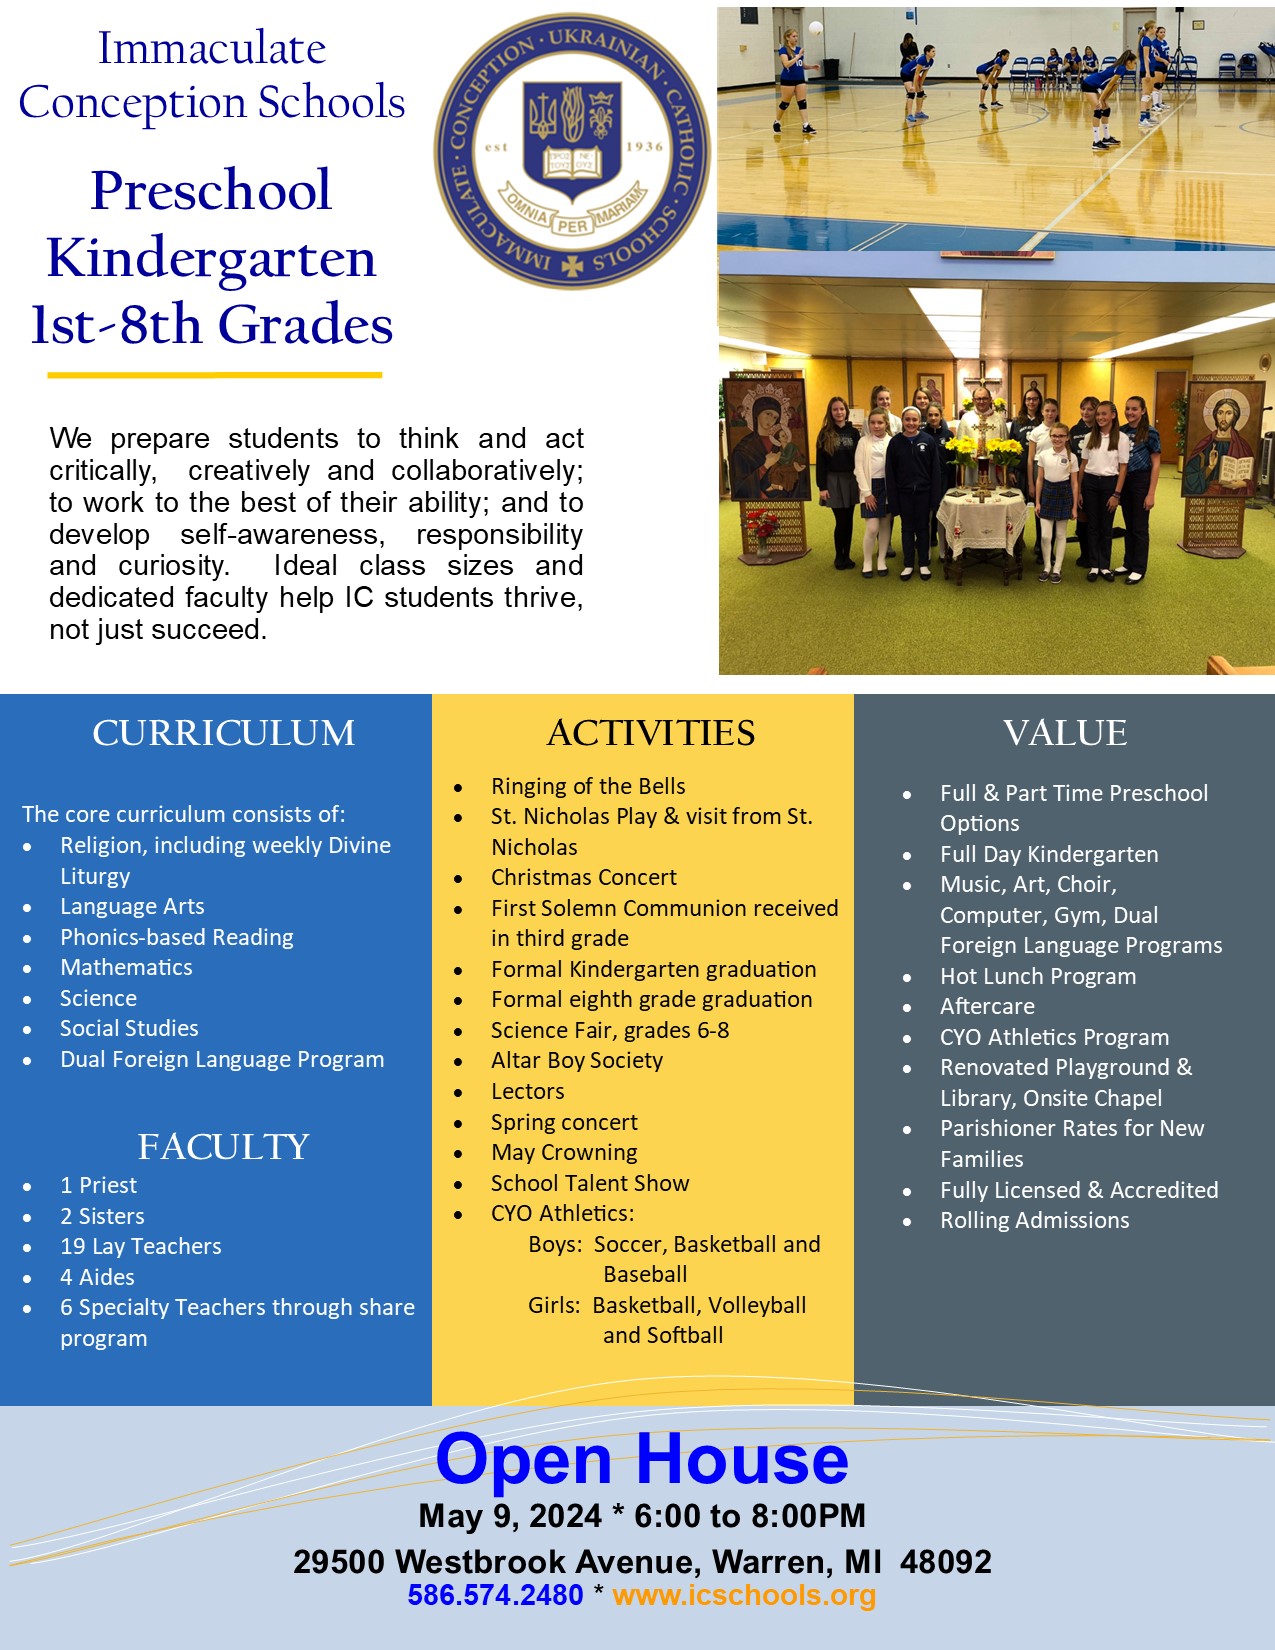 Immaculate Conception Schools - Open House